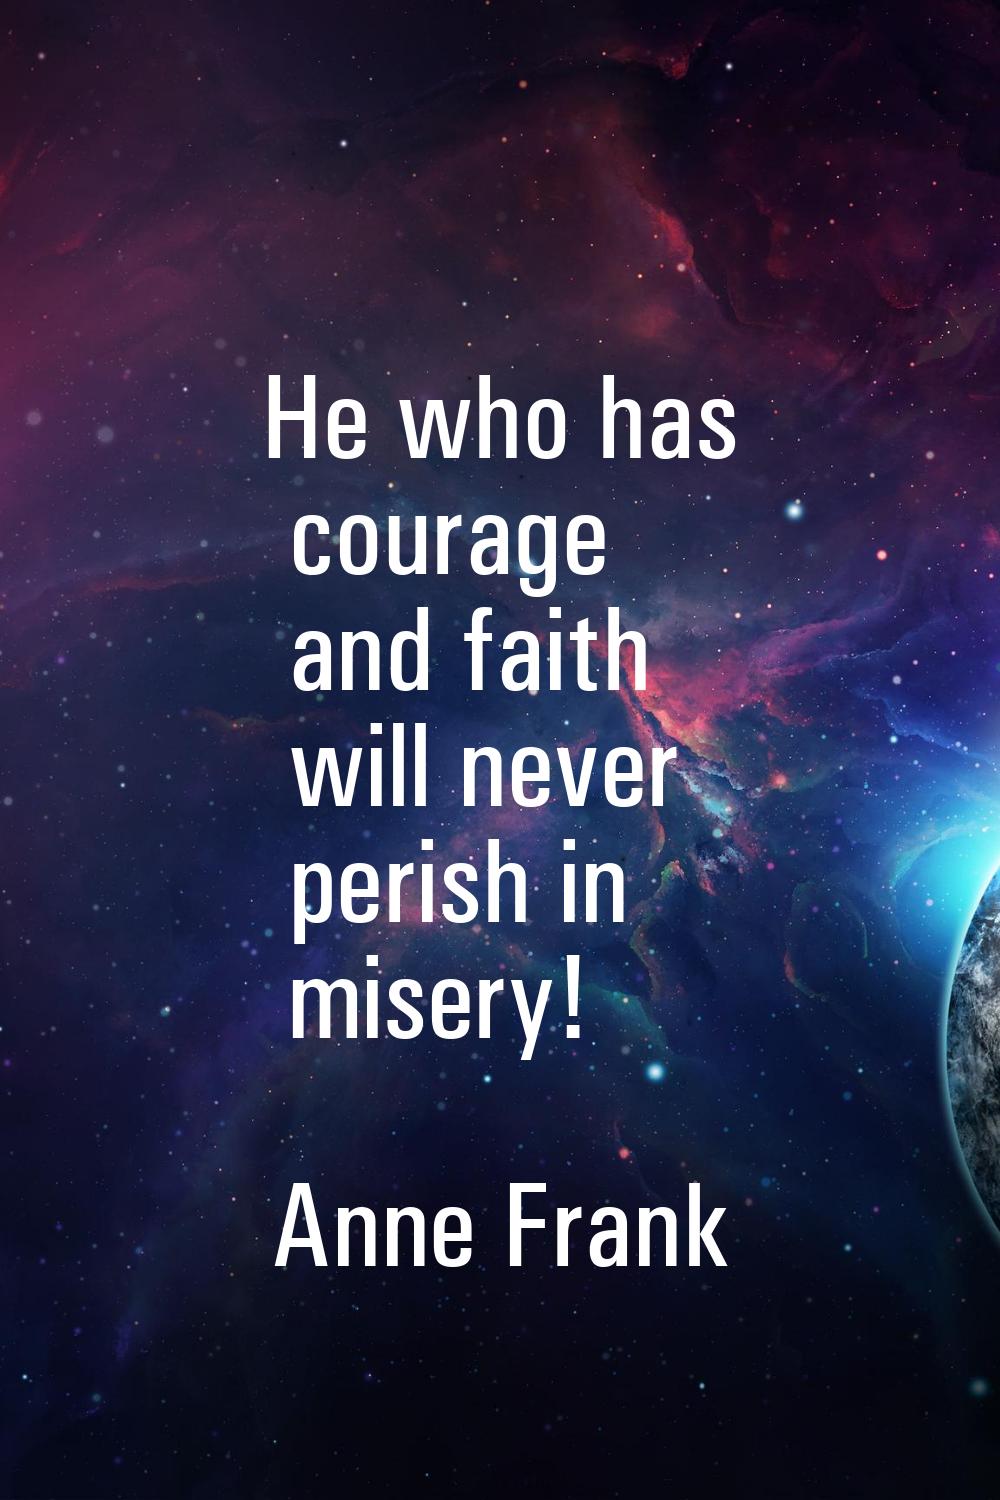 He who has courage and faith will never perish in misery!